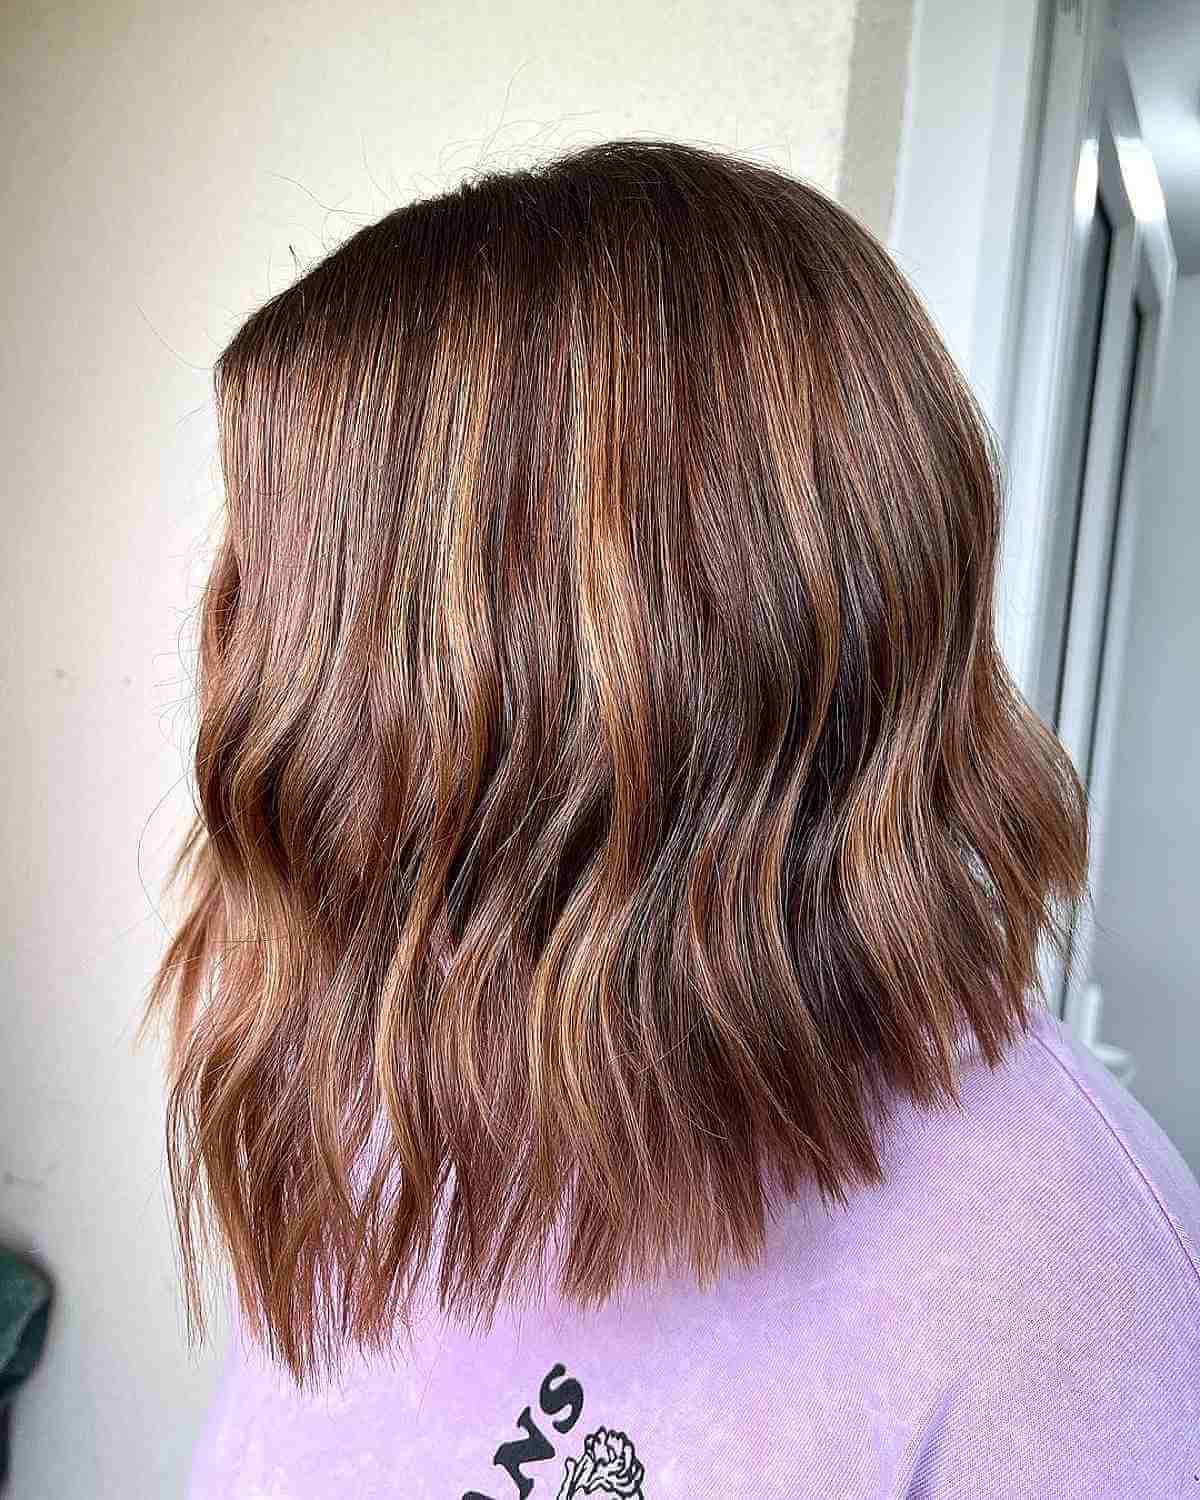 Slight A-Line Long Bob with Textured Waves